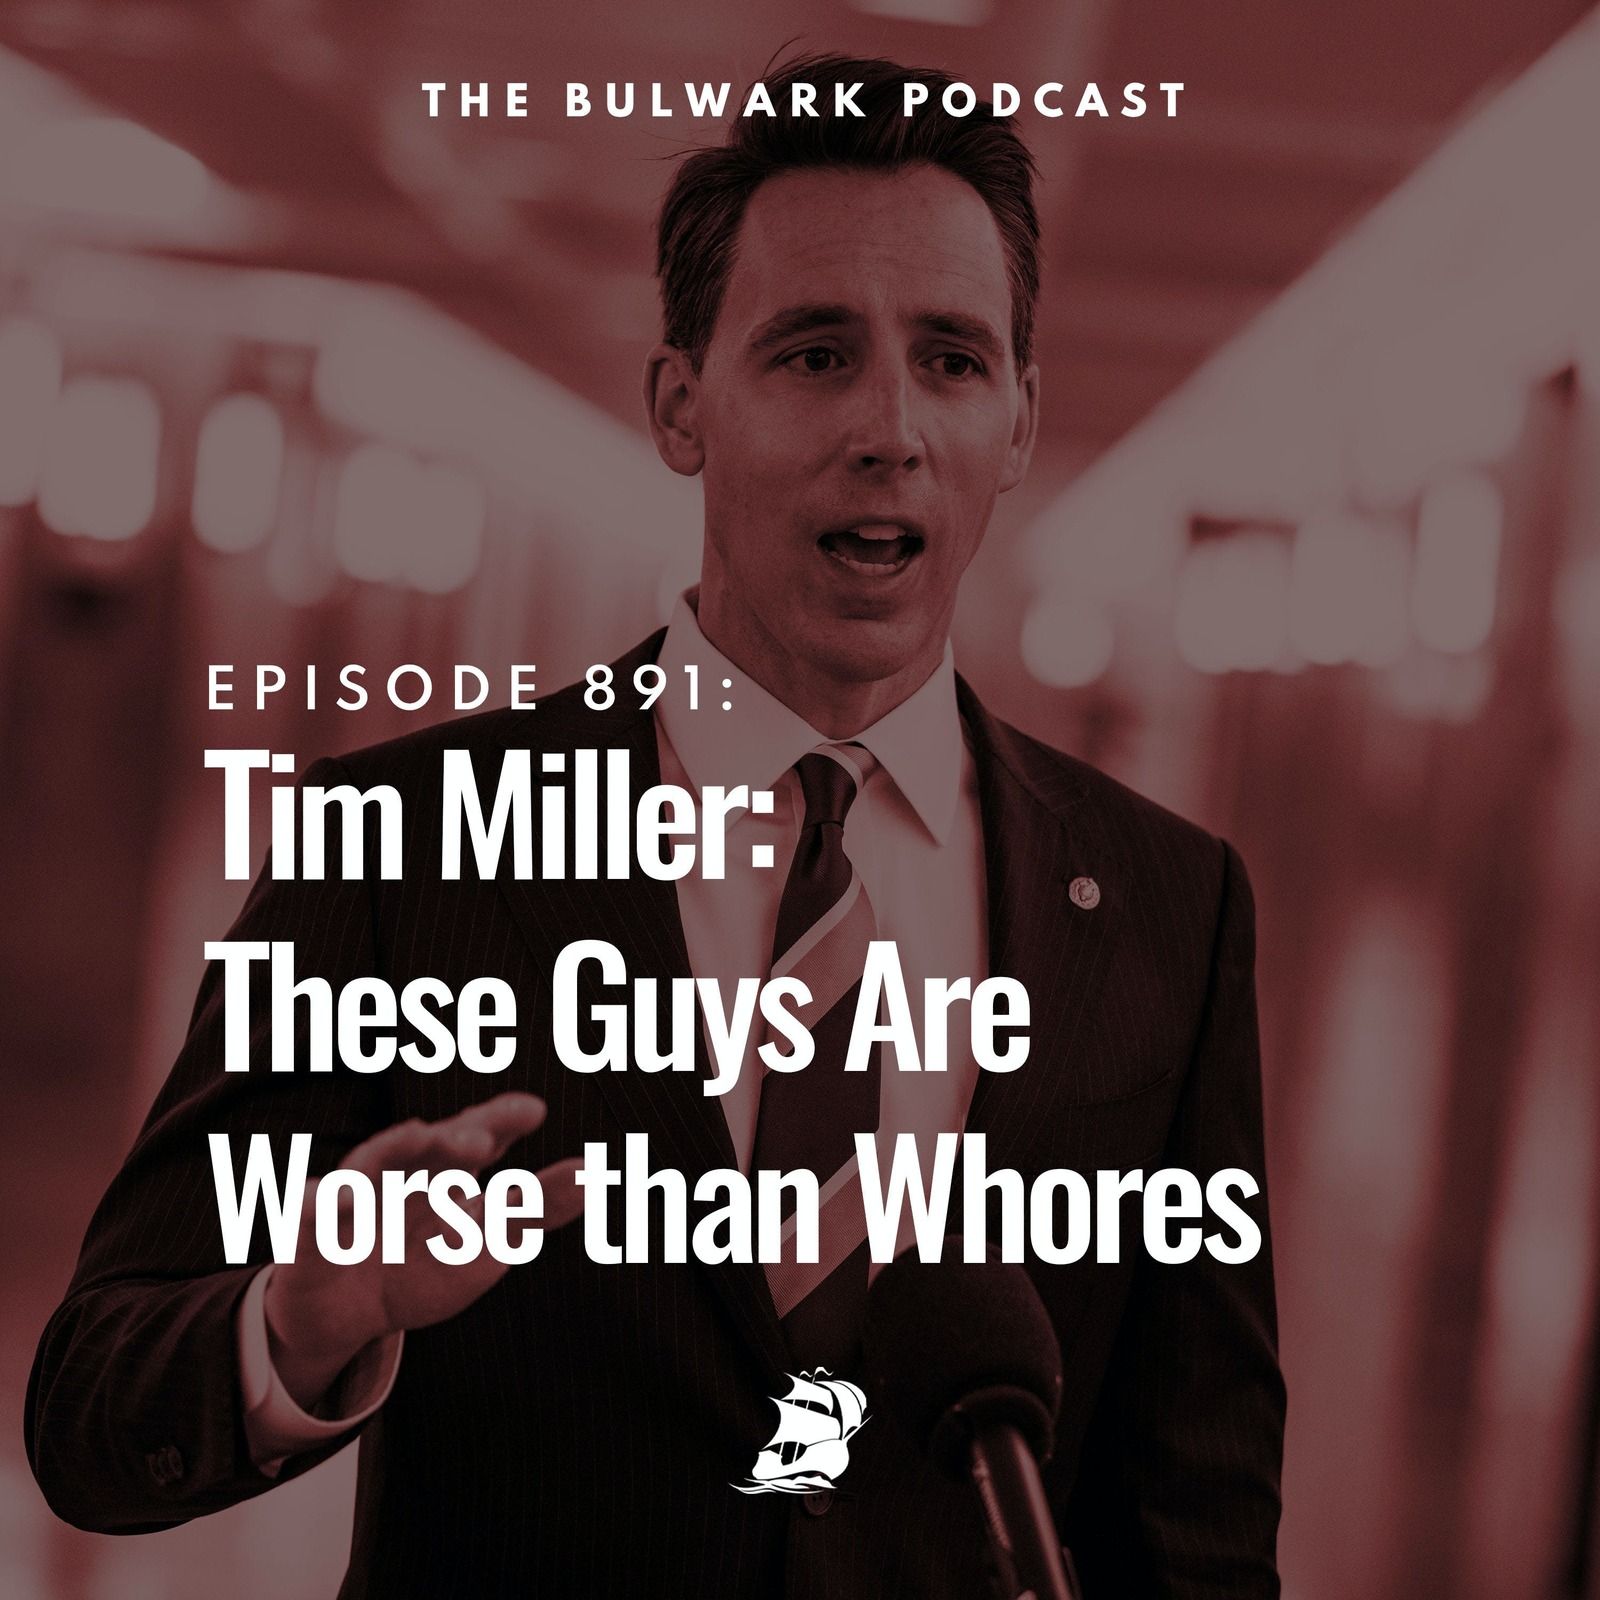 Tim Miller: These Guys Are Worse than Whores